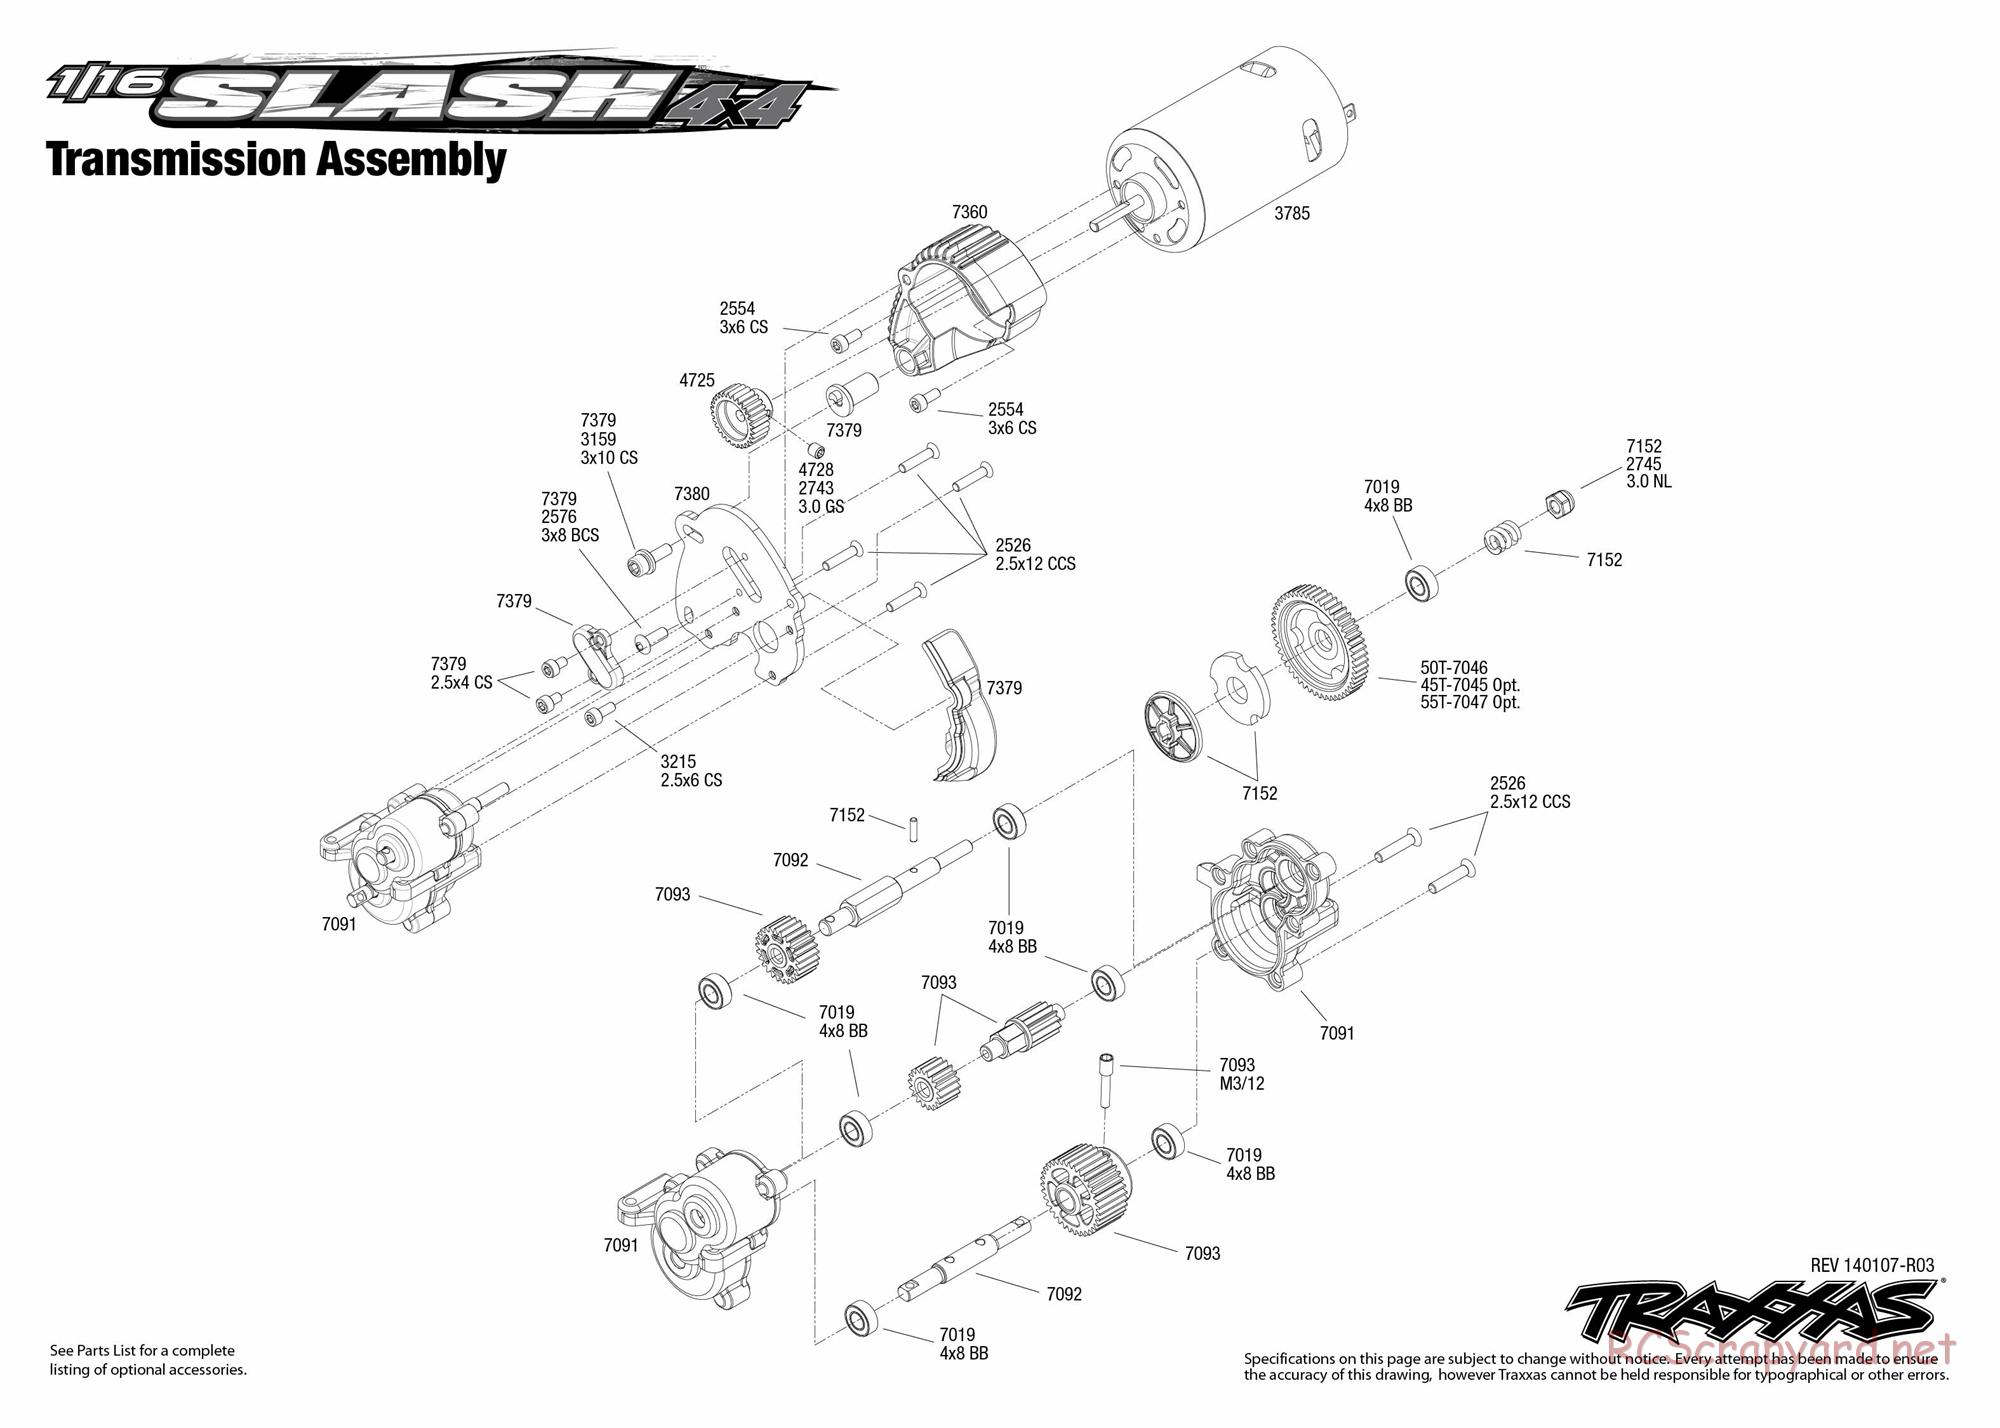 Traxxas - 1/16 Slash 4x4 Brushed (2013) - Exploded Views - Page 5